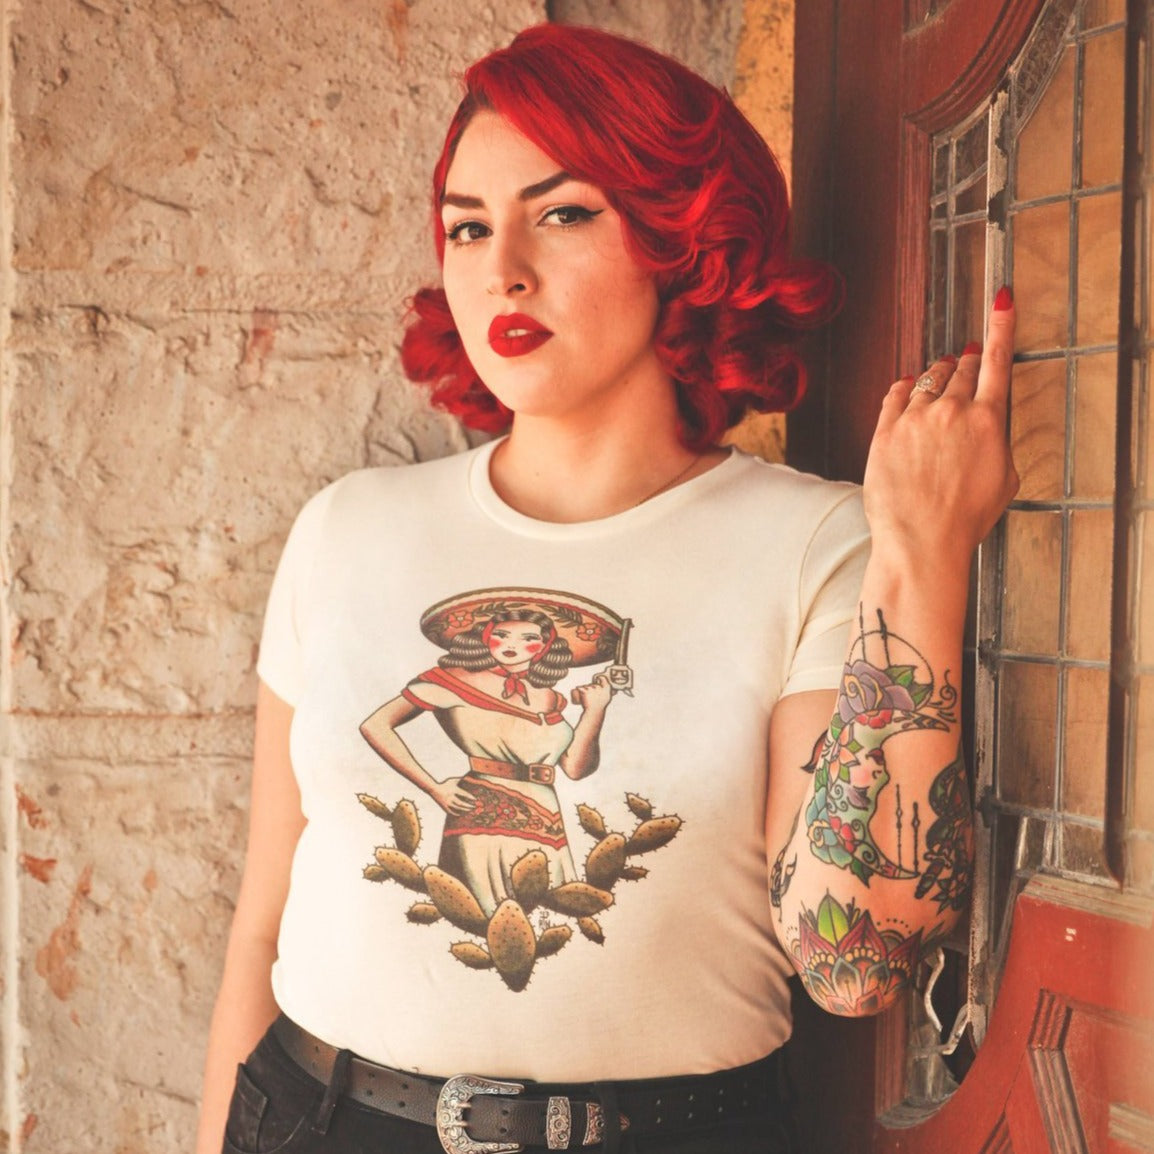 La Ranchera Tee by Mischief Made available at stupidkitsch.com